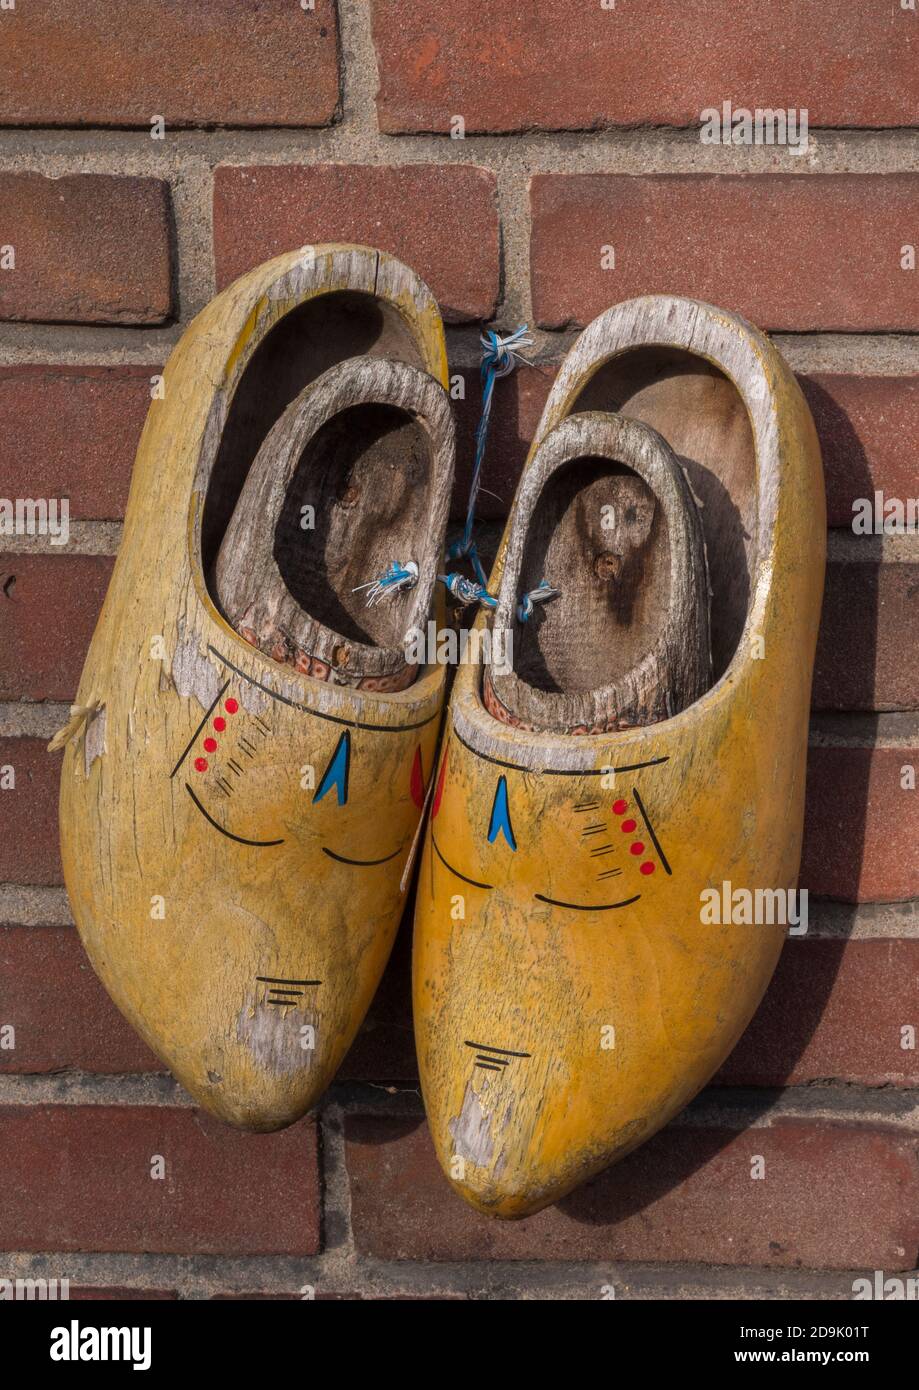 Adult an children's Dutch wooden shoes, clogs, on the wall Stock Photo